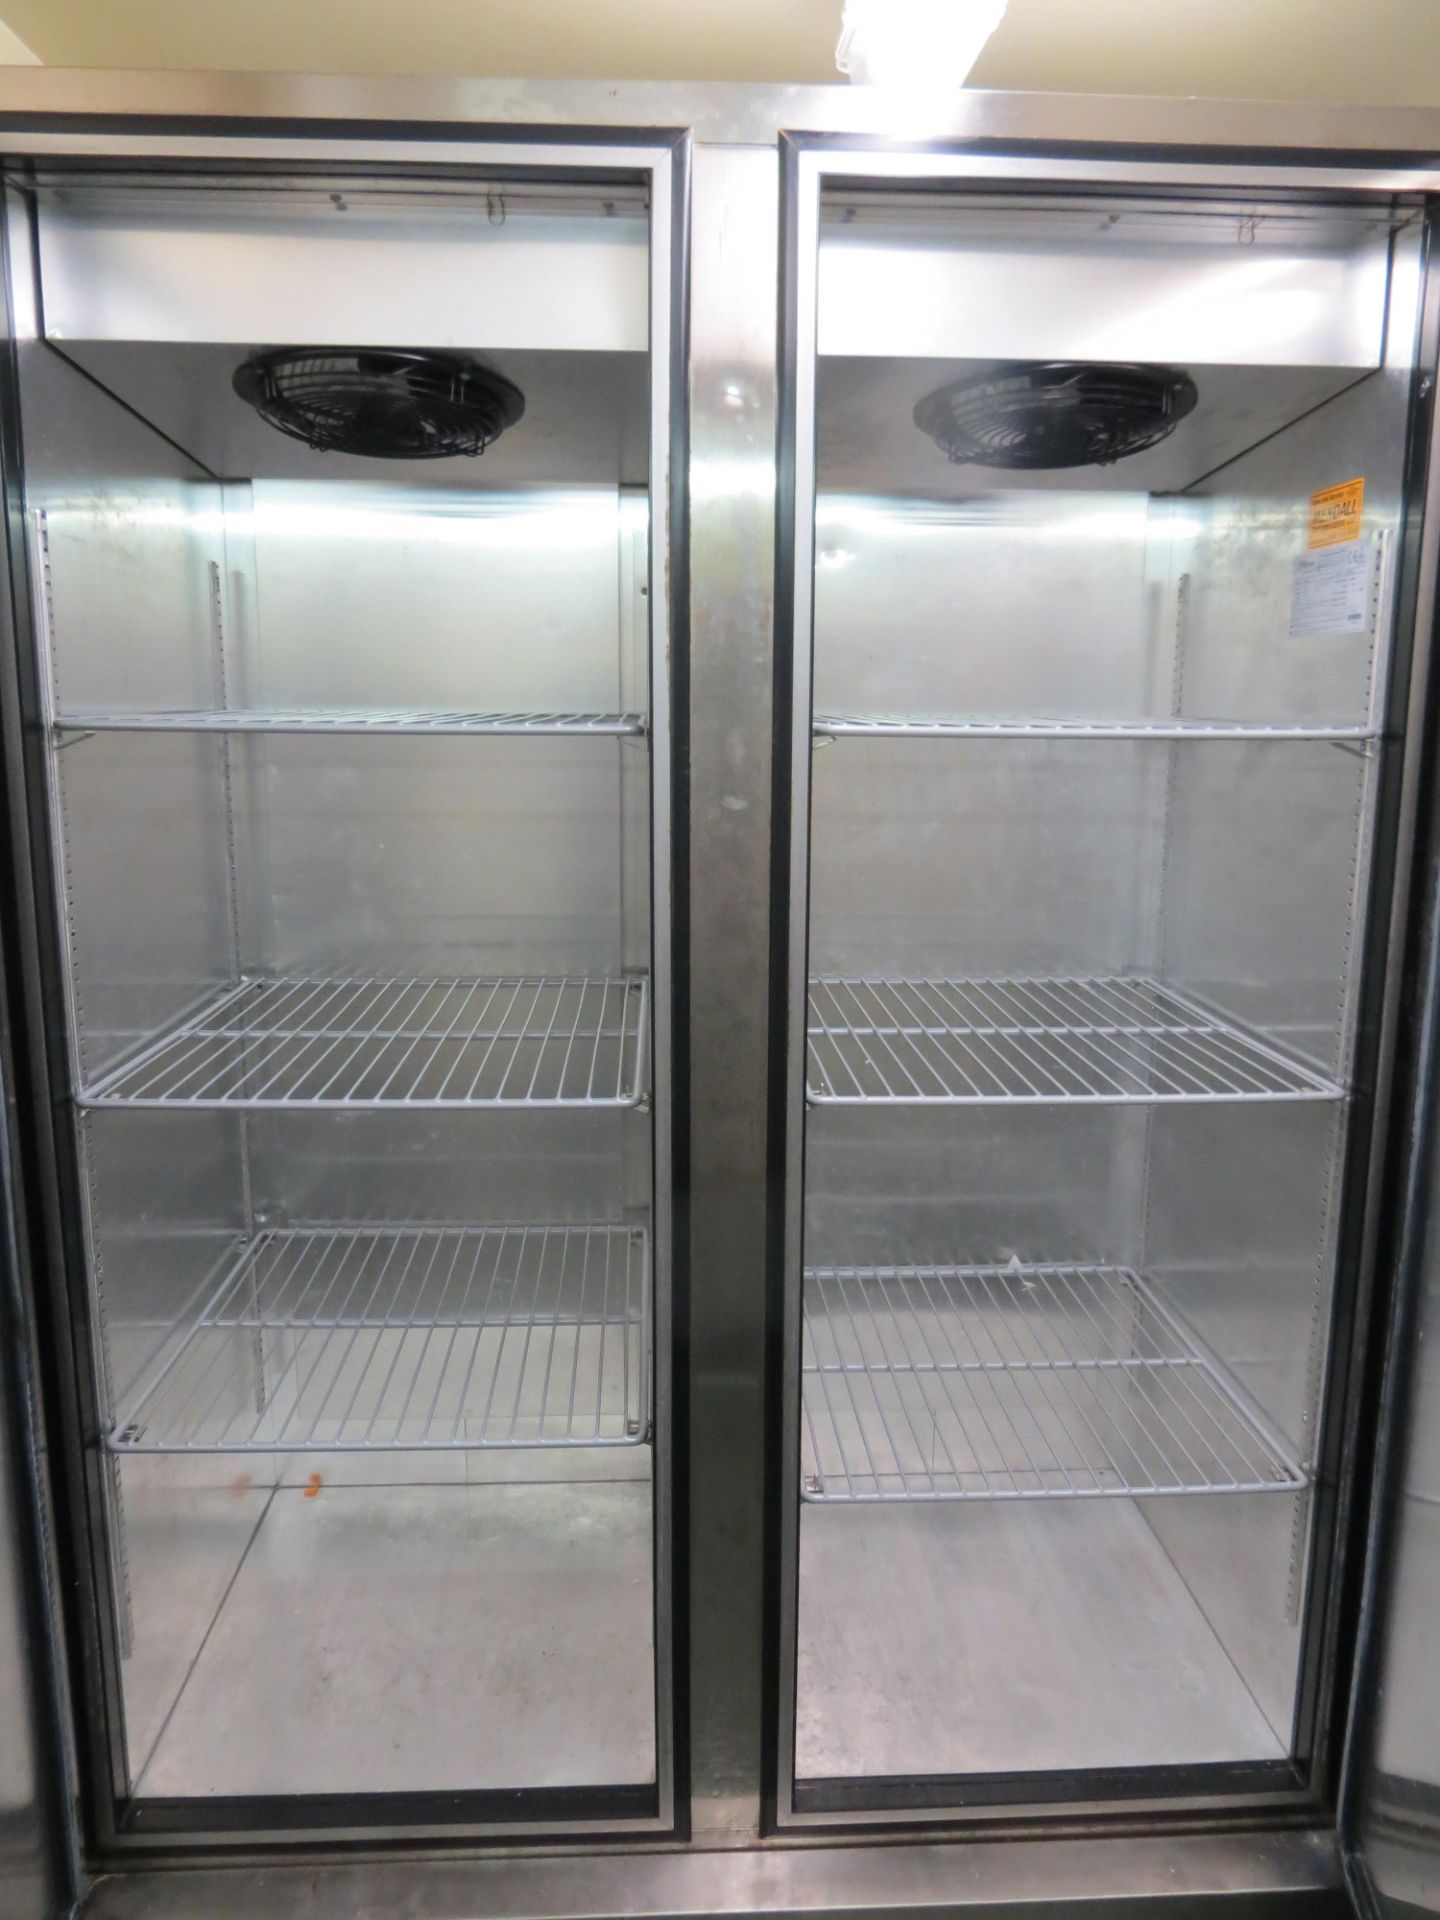 Foster FSL800L mobile 2-door stainless steel upright freezer s/n E5263780 - Image 2 of 3